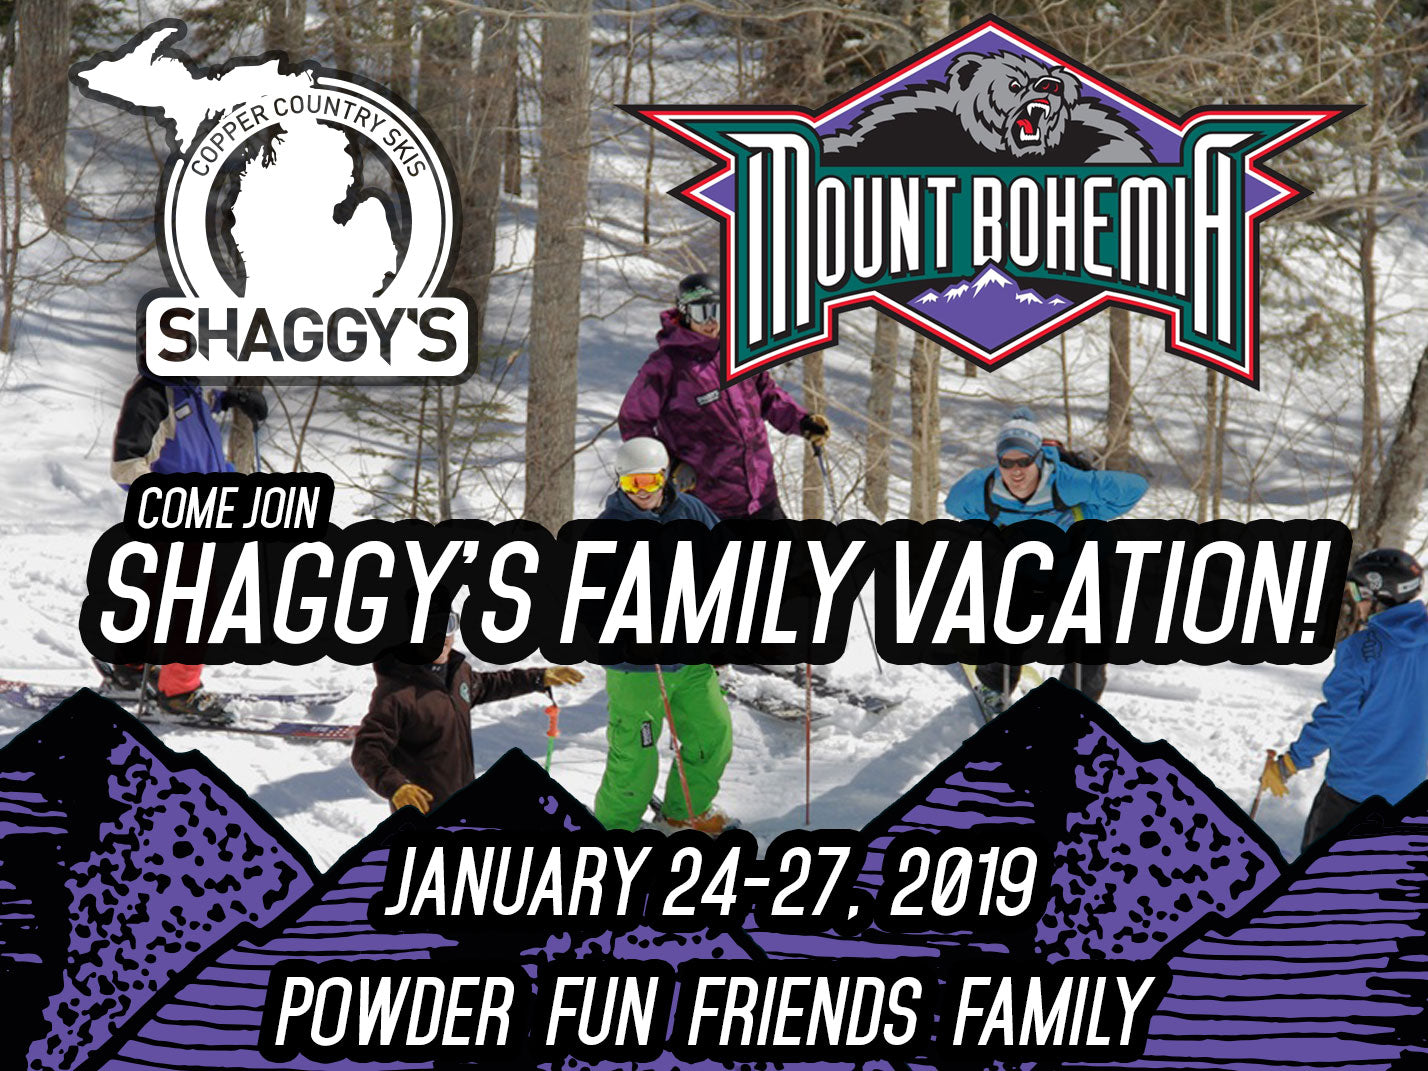 Shaggy's Family Vacation at Mount Bohemia 2019 - You're Invited